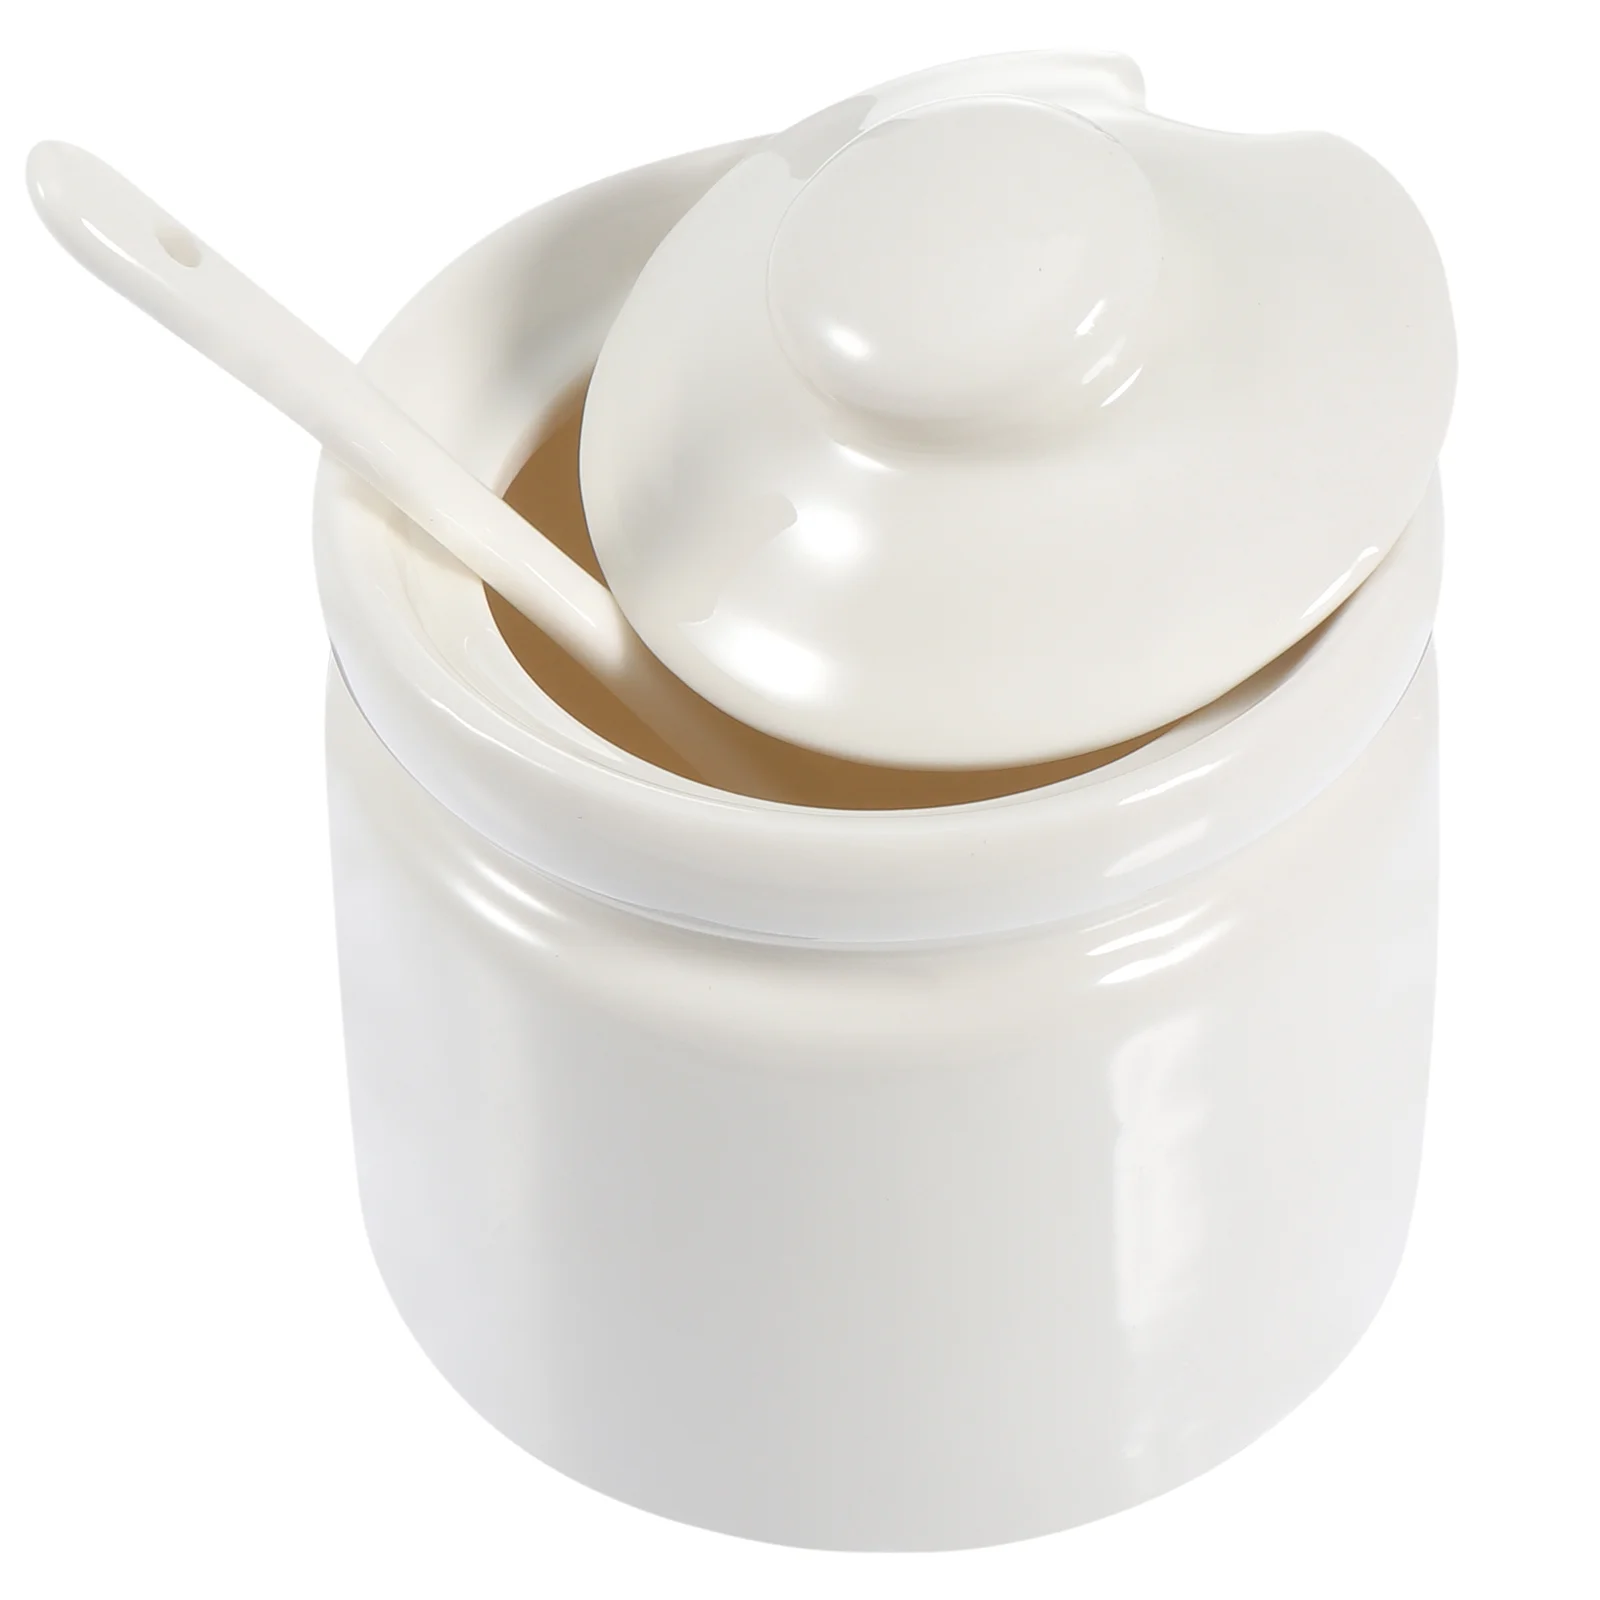 

1Pc Ceramic Sugar Jar With spoon Durable Water Coffee Candy Holder Practical Milk Container